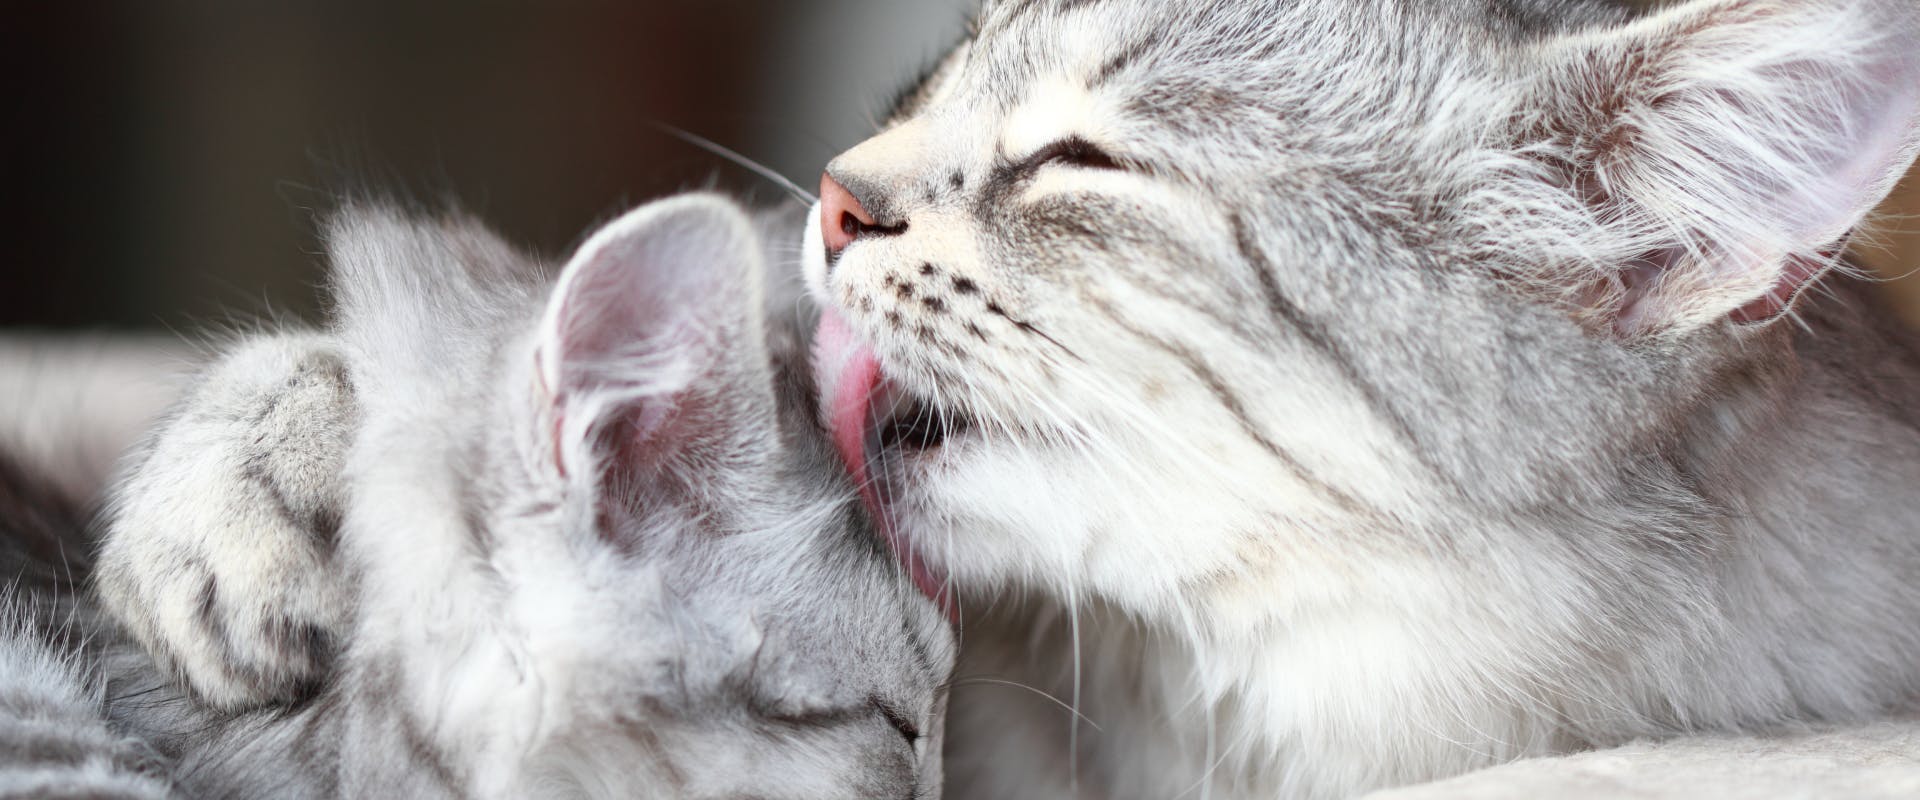 a gray tabby washing the head of a young kitten